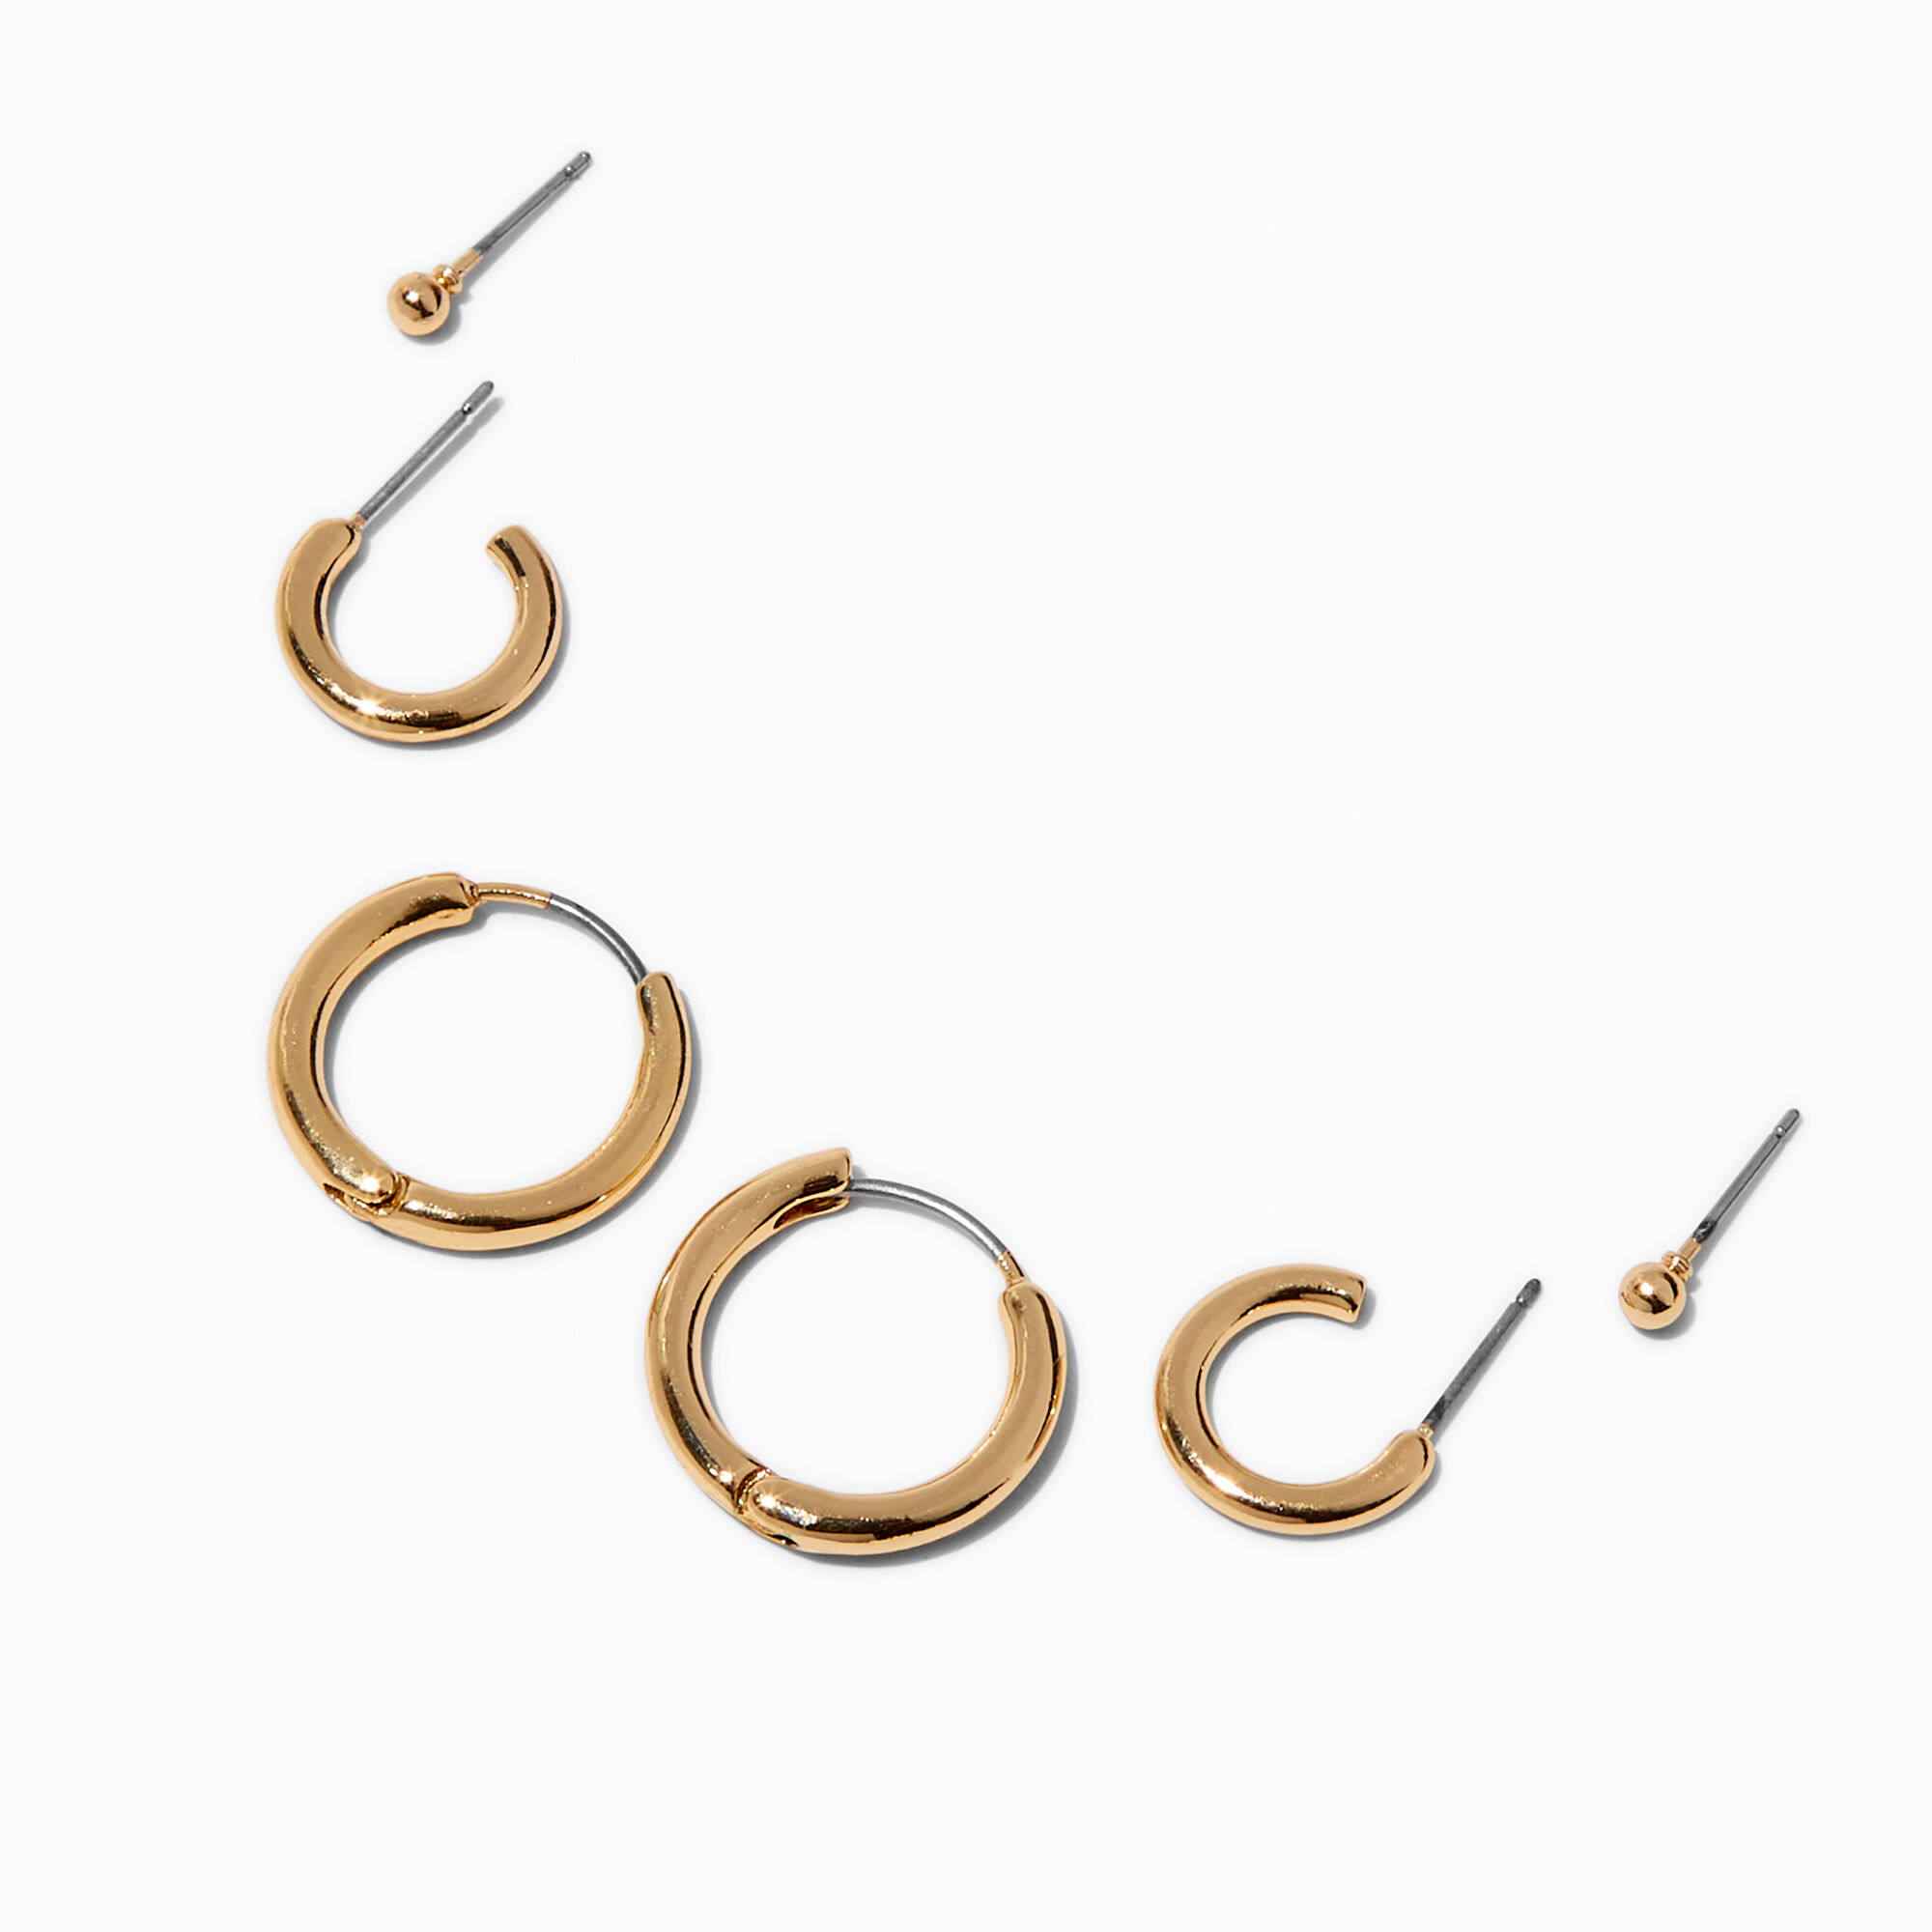 View Claires Tone Thick Clicker Earring Stackables Set 3 Pack Gold information